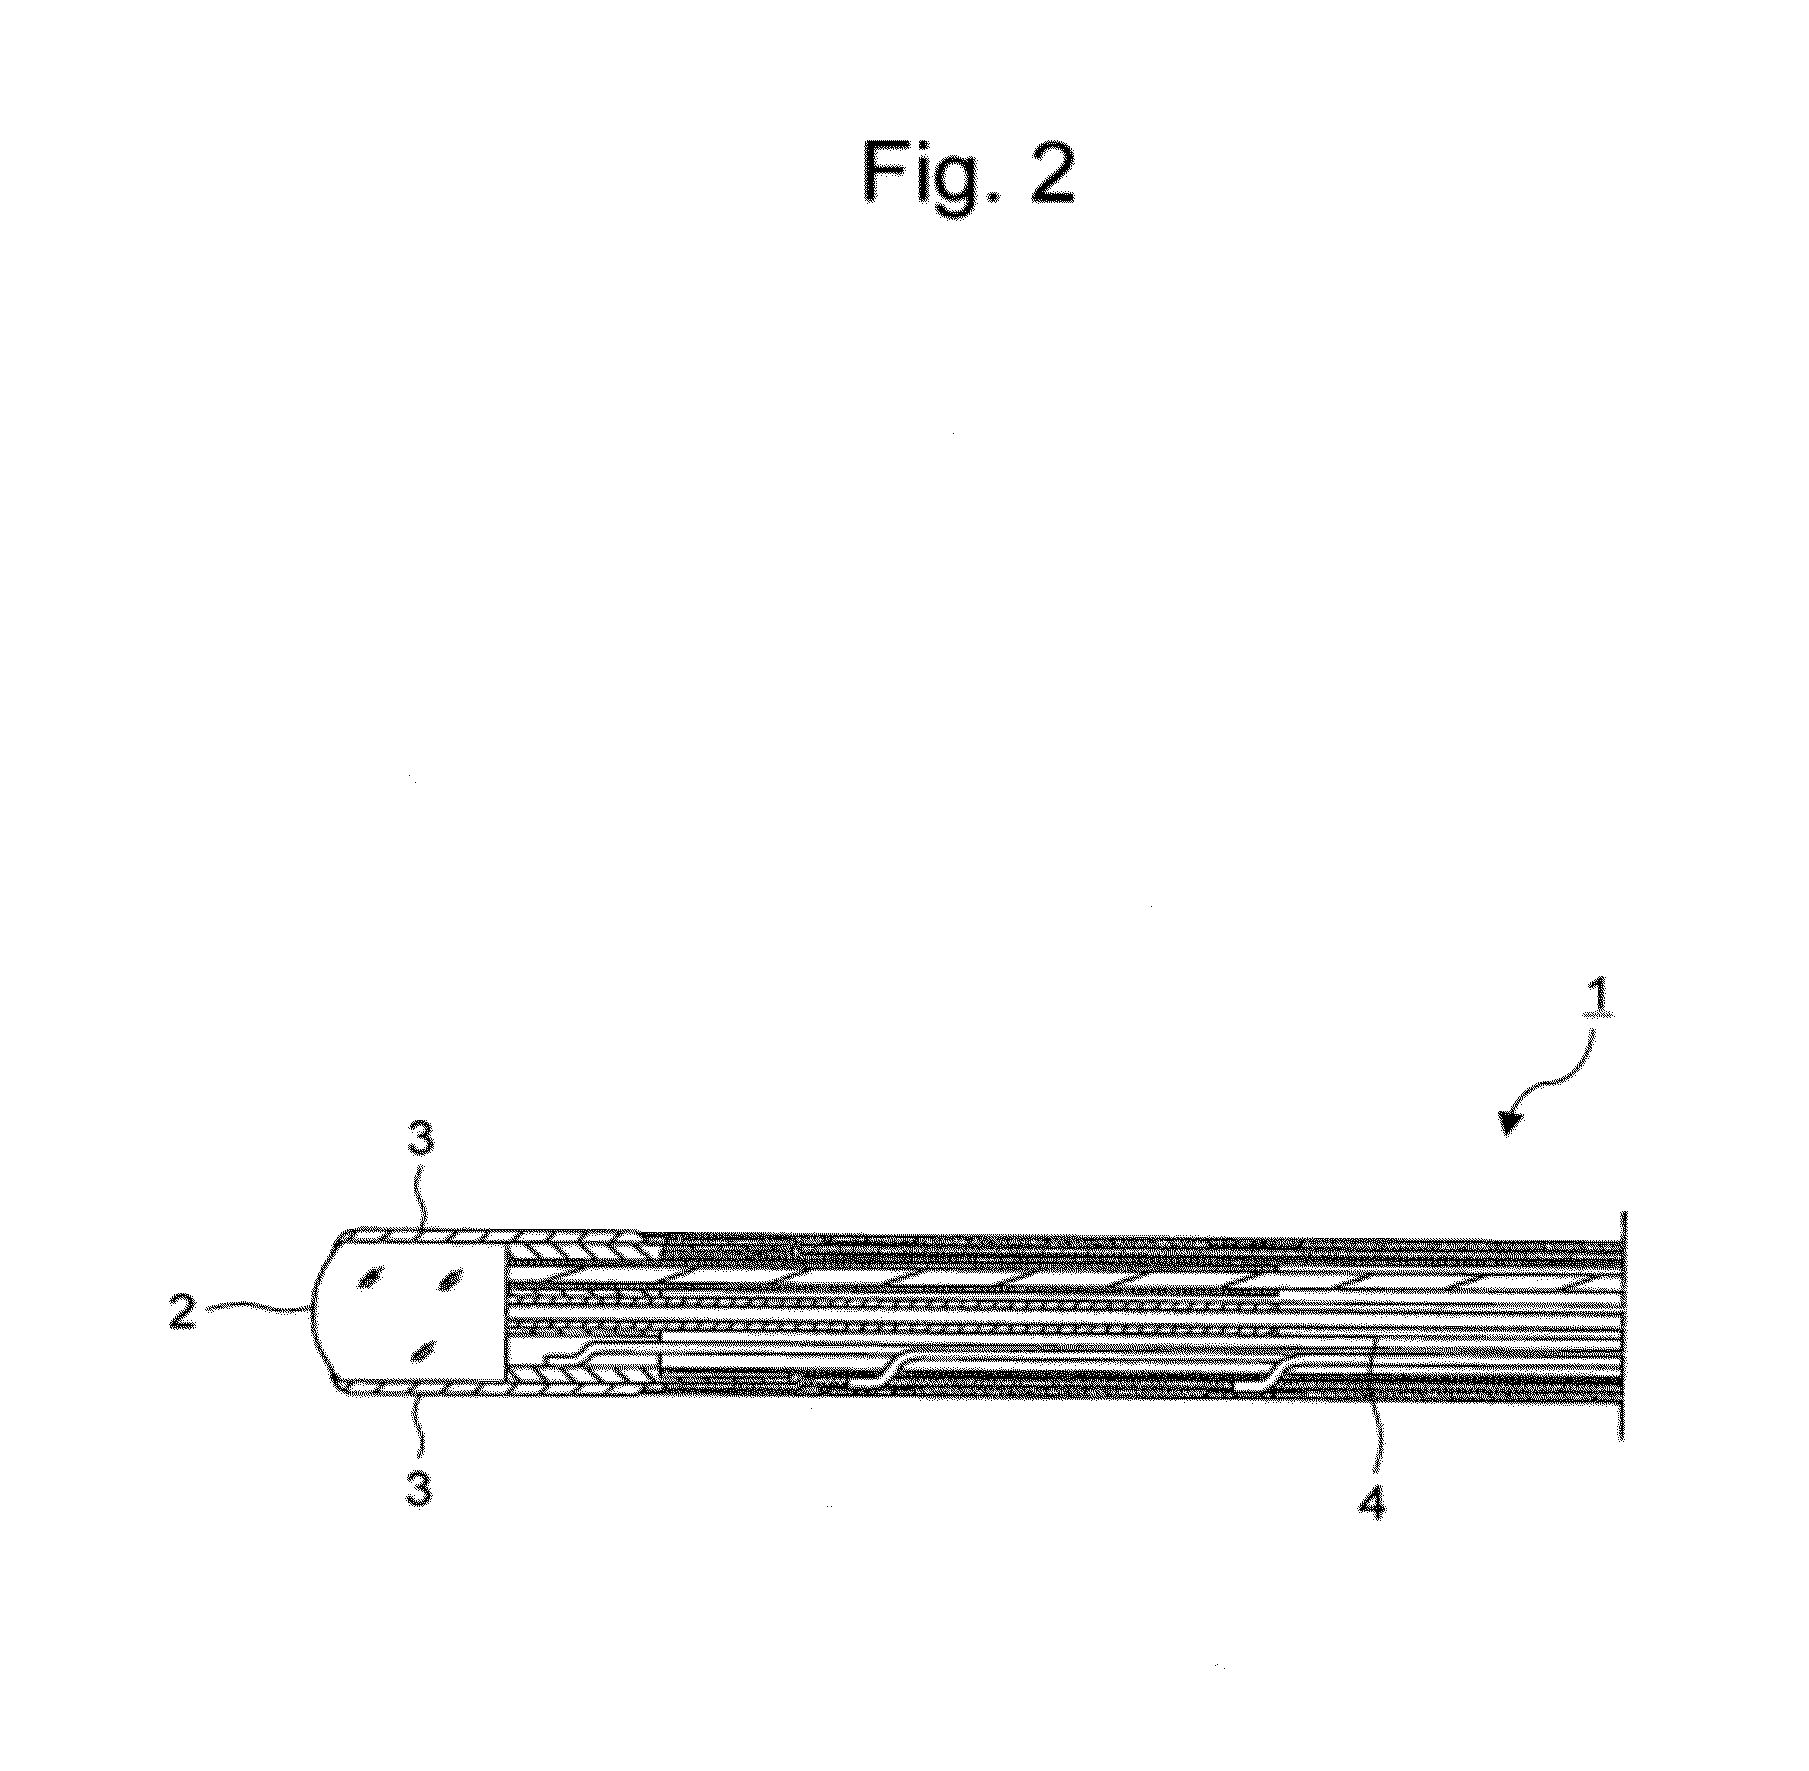 Catheter for performing photodynamic ablation of cardiac muscle tissue via photochemical reaction